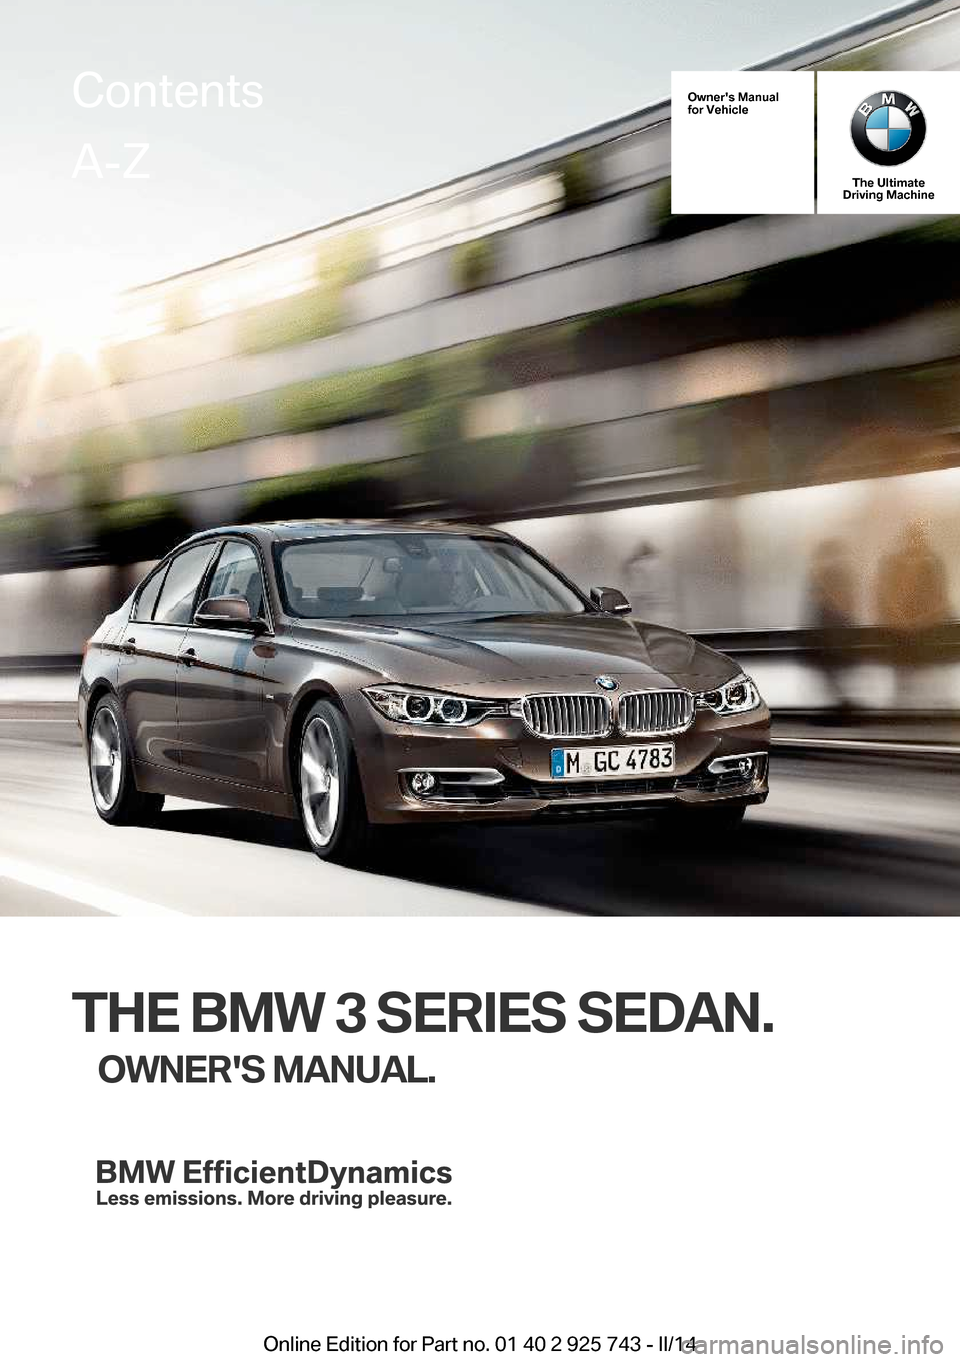 BMW 3 SERIES SEDAN 2014 F30 Owners Manual Owners Manual
for Vehicle
The Ultimate
Driving Machine
THE BMW 3 SERIES SEDAN.
OWNERS MANUAL.
ContentsA-Z
Online Edition for Part no. 01 40 2 925 743 - II/14   